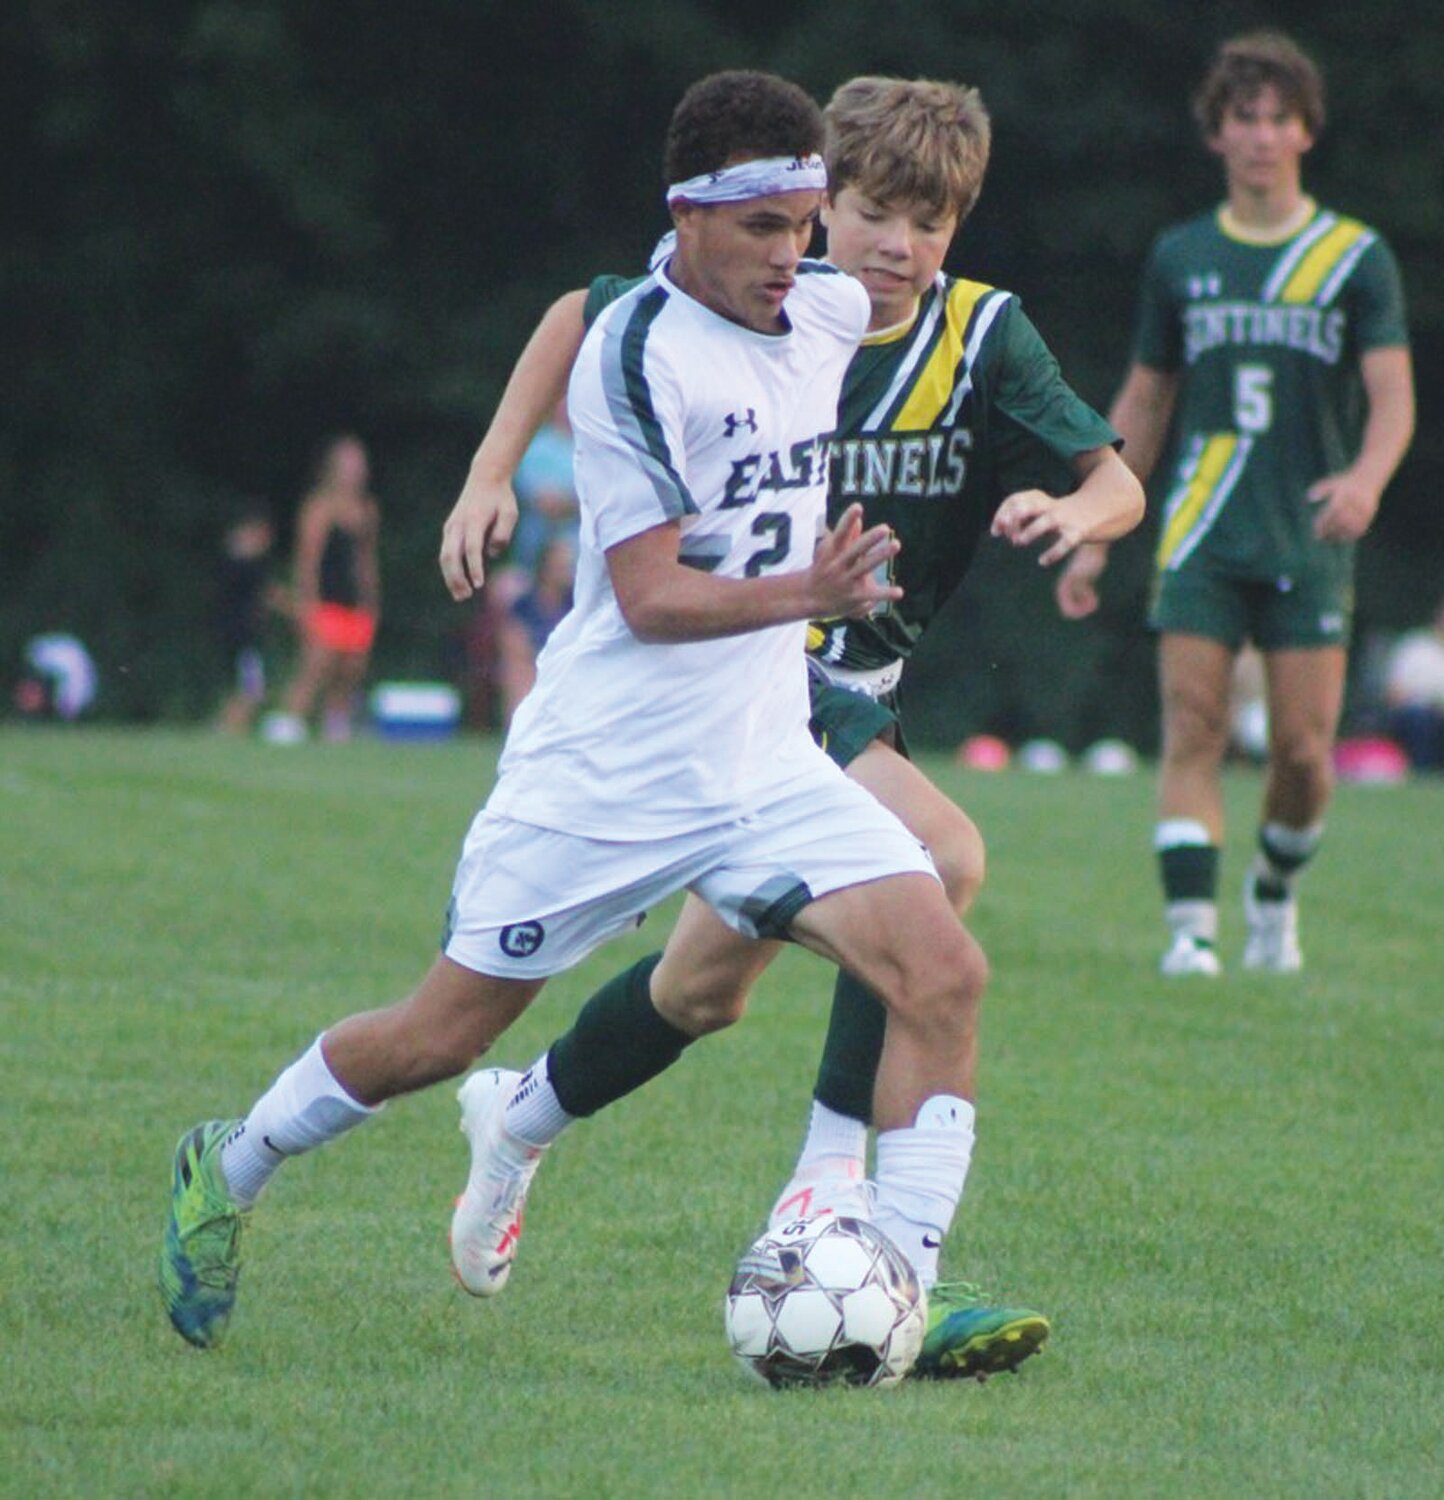 BATTLE FOR THE BALL: Cranston East’s Aaron Morales chases down the ball. (Photos by Alex Sponseller)